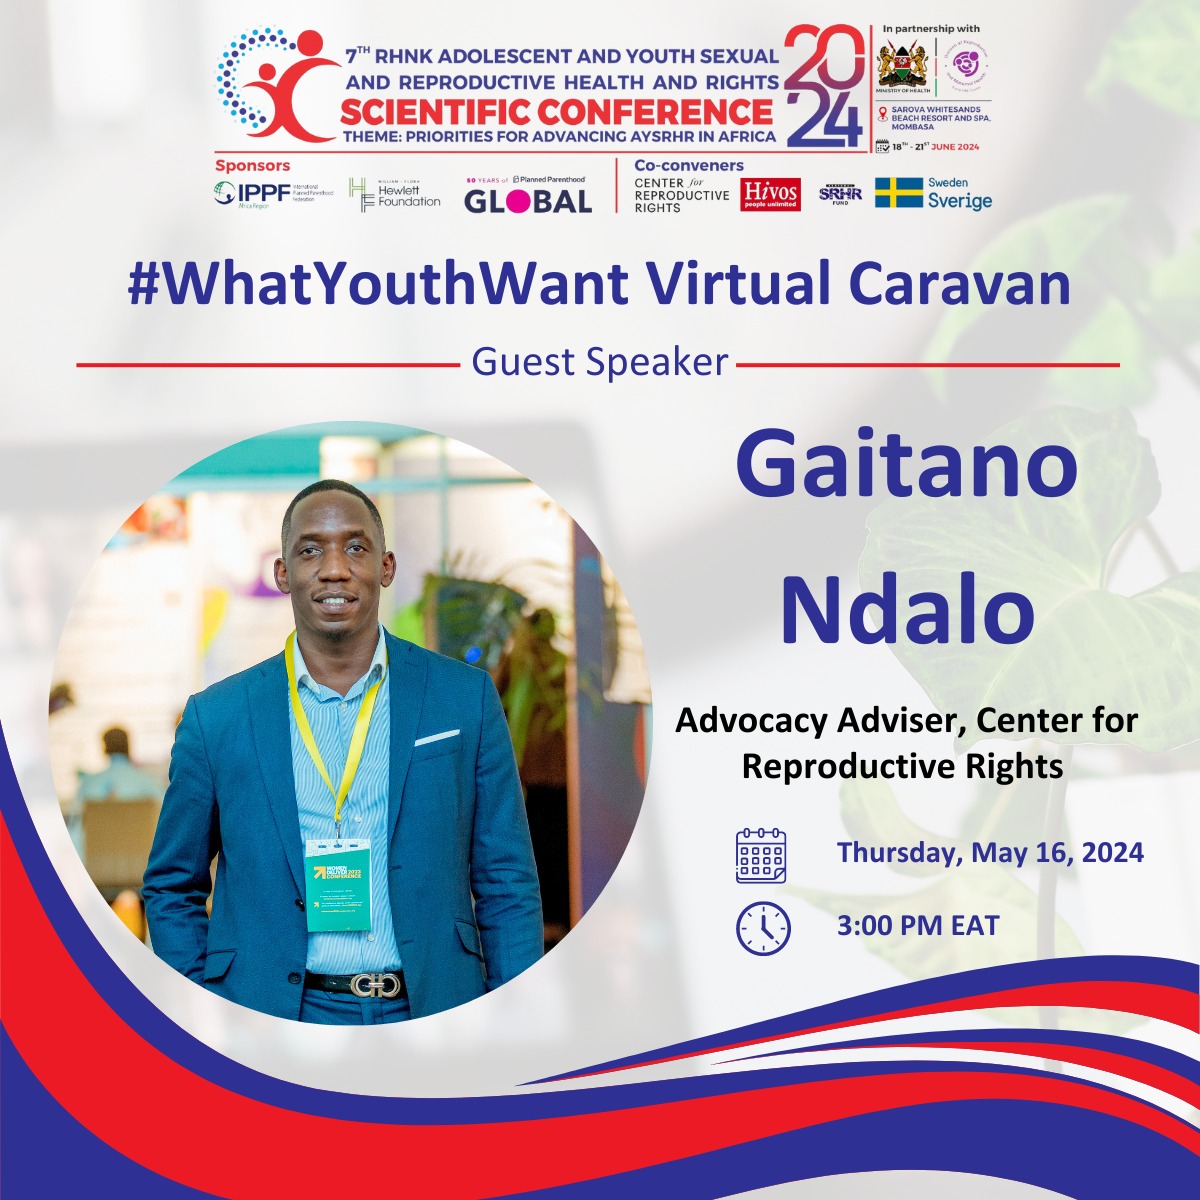 We have a great line up of speakers for our virtual Youth Caravan have you registered? If not what are you waiting for register now and be part of this transformative experience by the youth for the youths
us02web.zoom.us/meeting/regist…
#WhatYouthWant 
#RHNKConference2024 
@rhnkorg